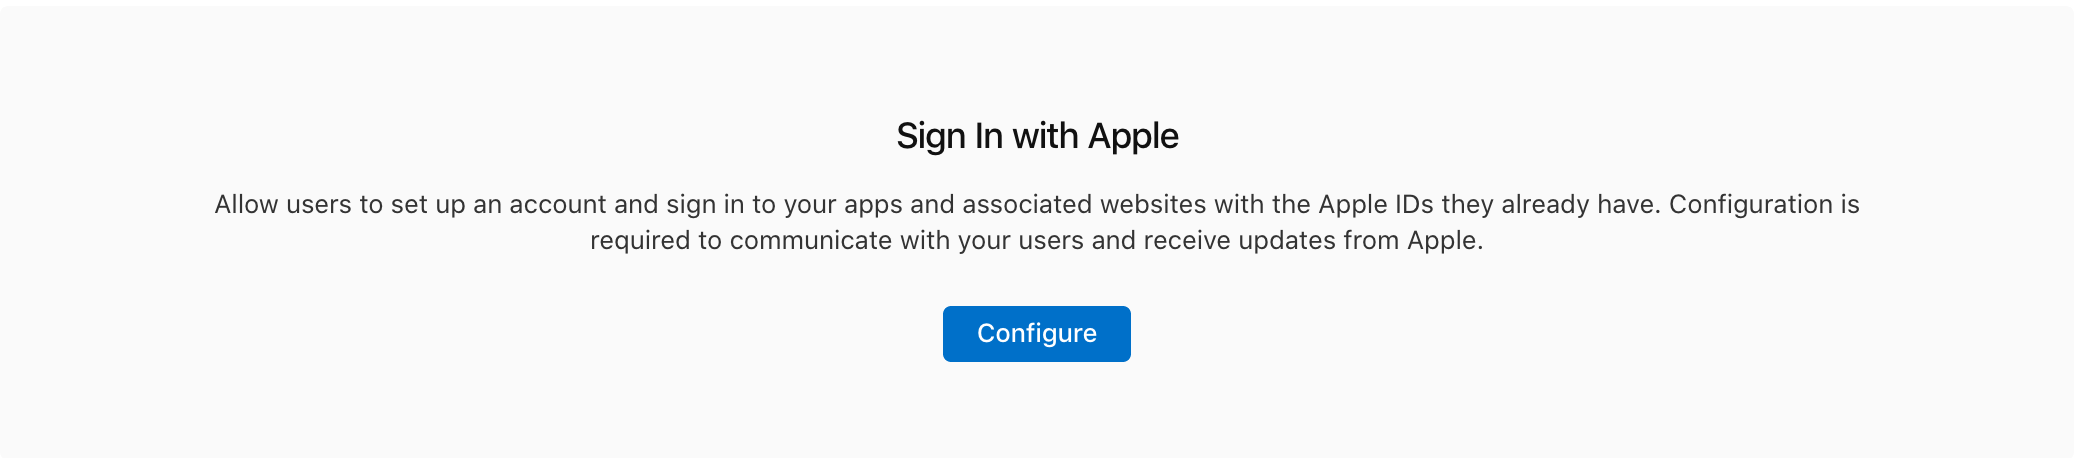 Sign in with Apple configuration